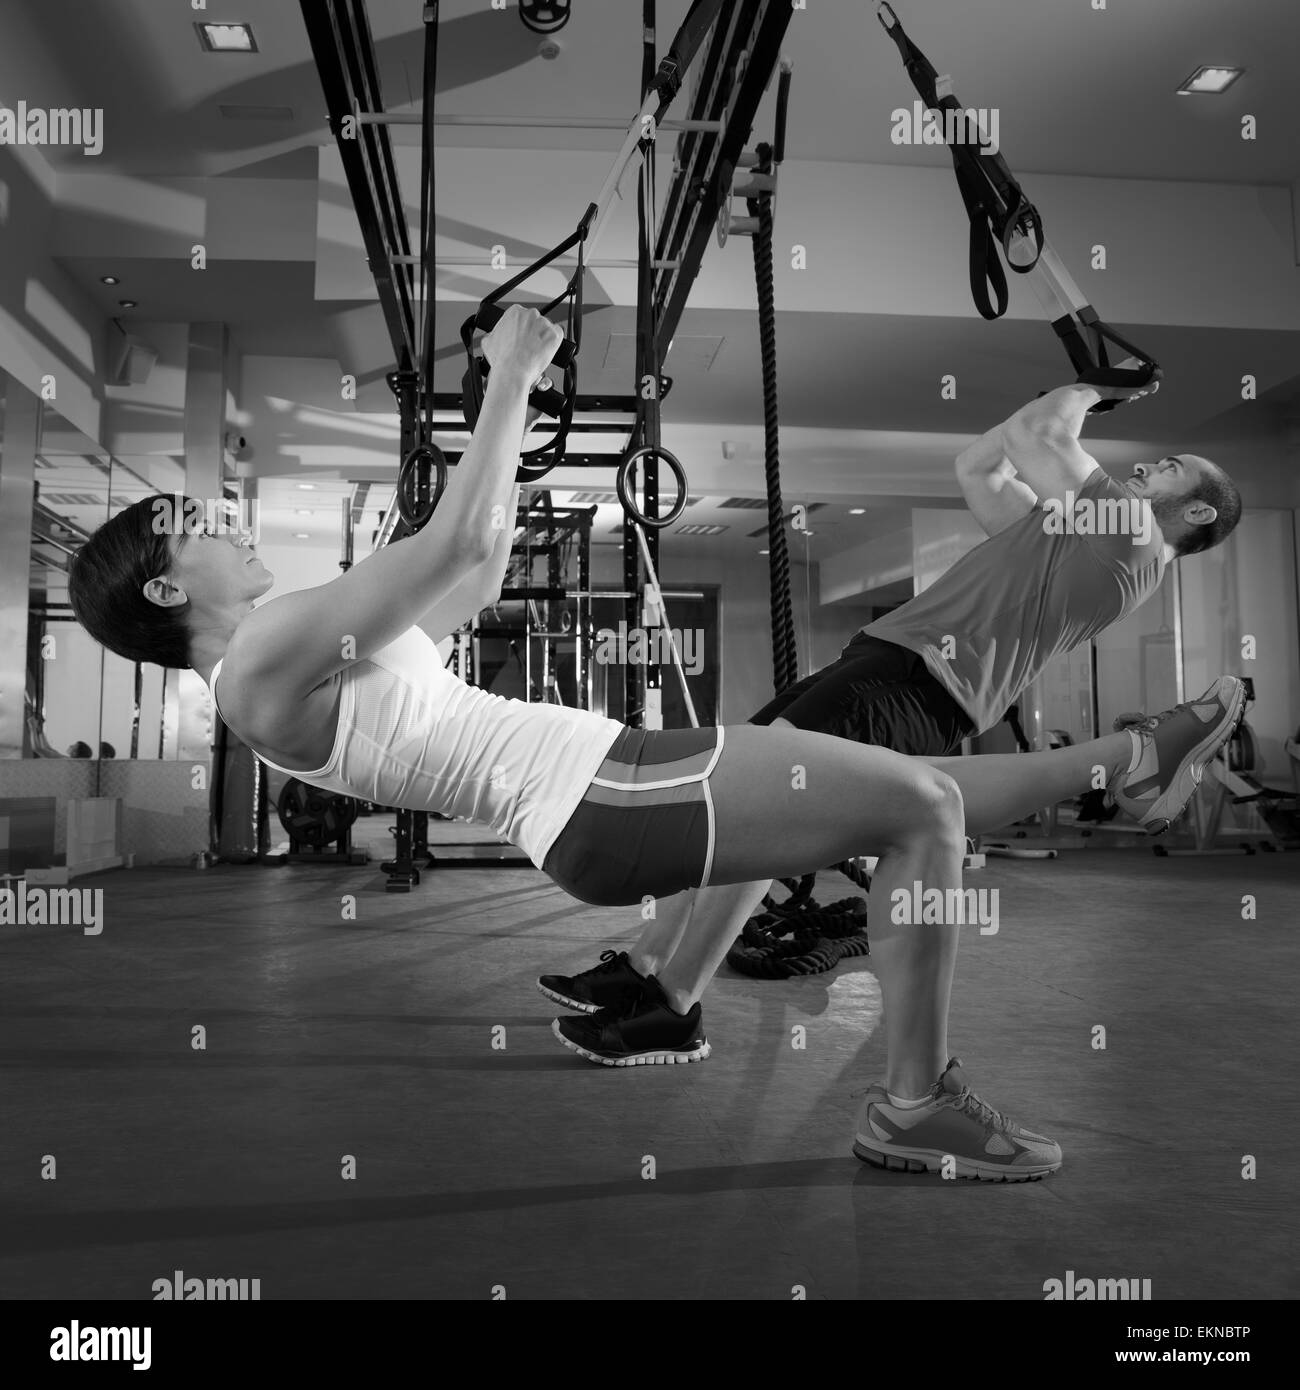 Fitness TRX training exercises at gym woman and man Stock Photo